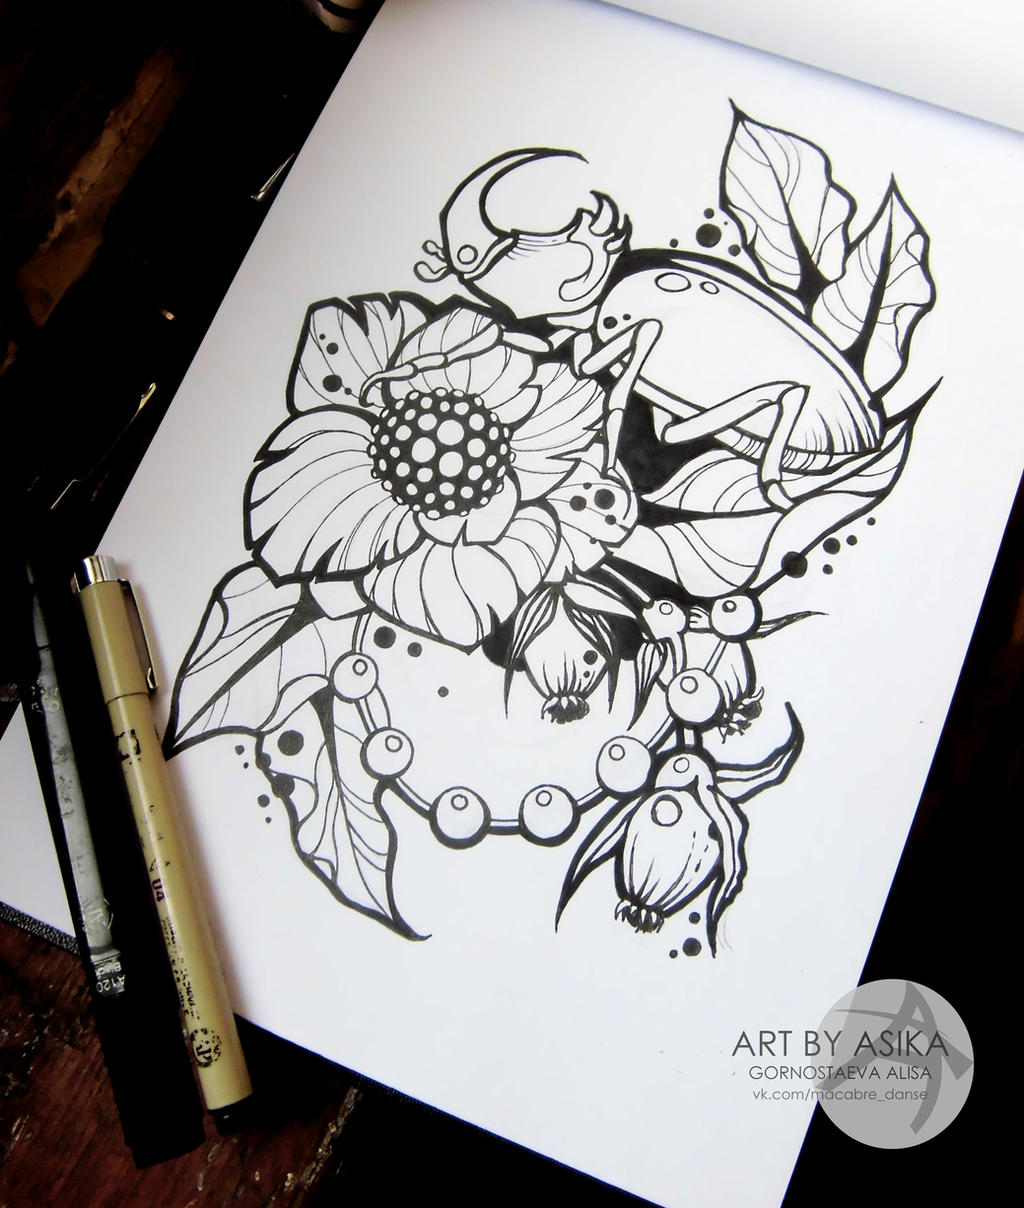 traditional tattoo neo art flash by sketch, on Tattoo DeviantArt AsikaArt neotraditional